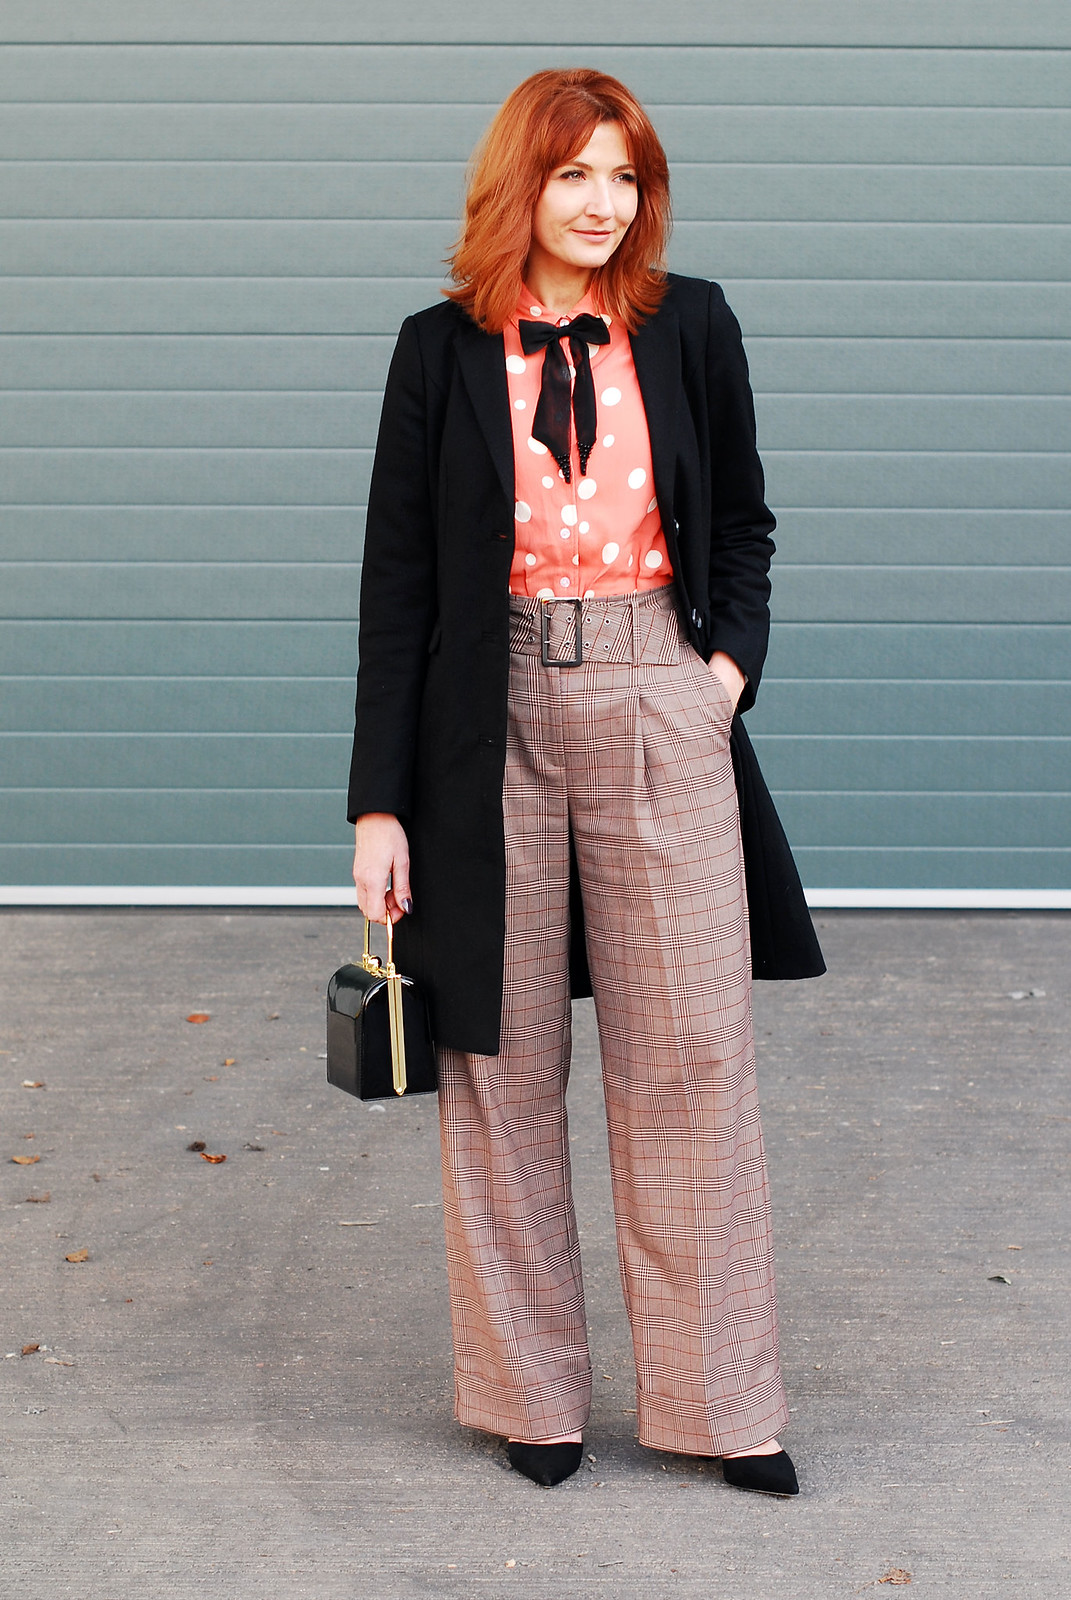 How to get the Katharine Hepburn look: Wide leg check turn up trousers \ masculine-cut black coat \ polka dot blouse with embellished black bow neck tie \ black box handbag \ cone-heeled black pointed shoes | Not Dressed As Lamb, over 40 style